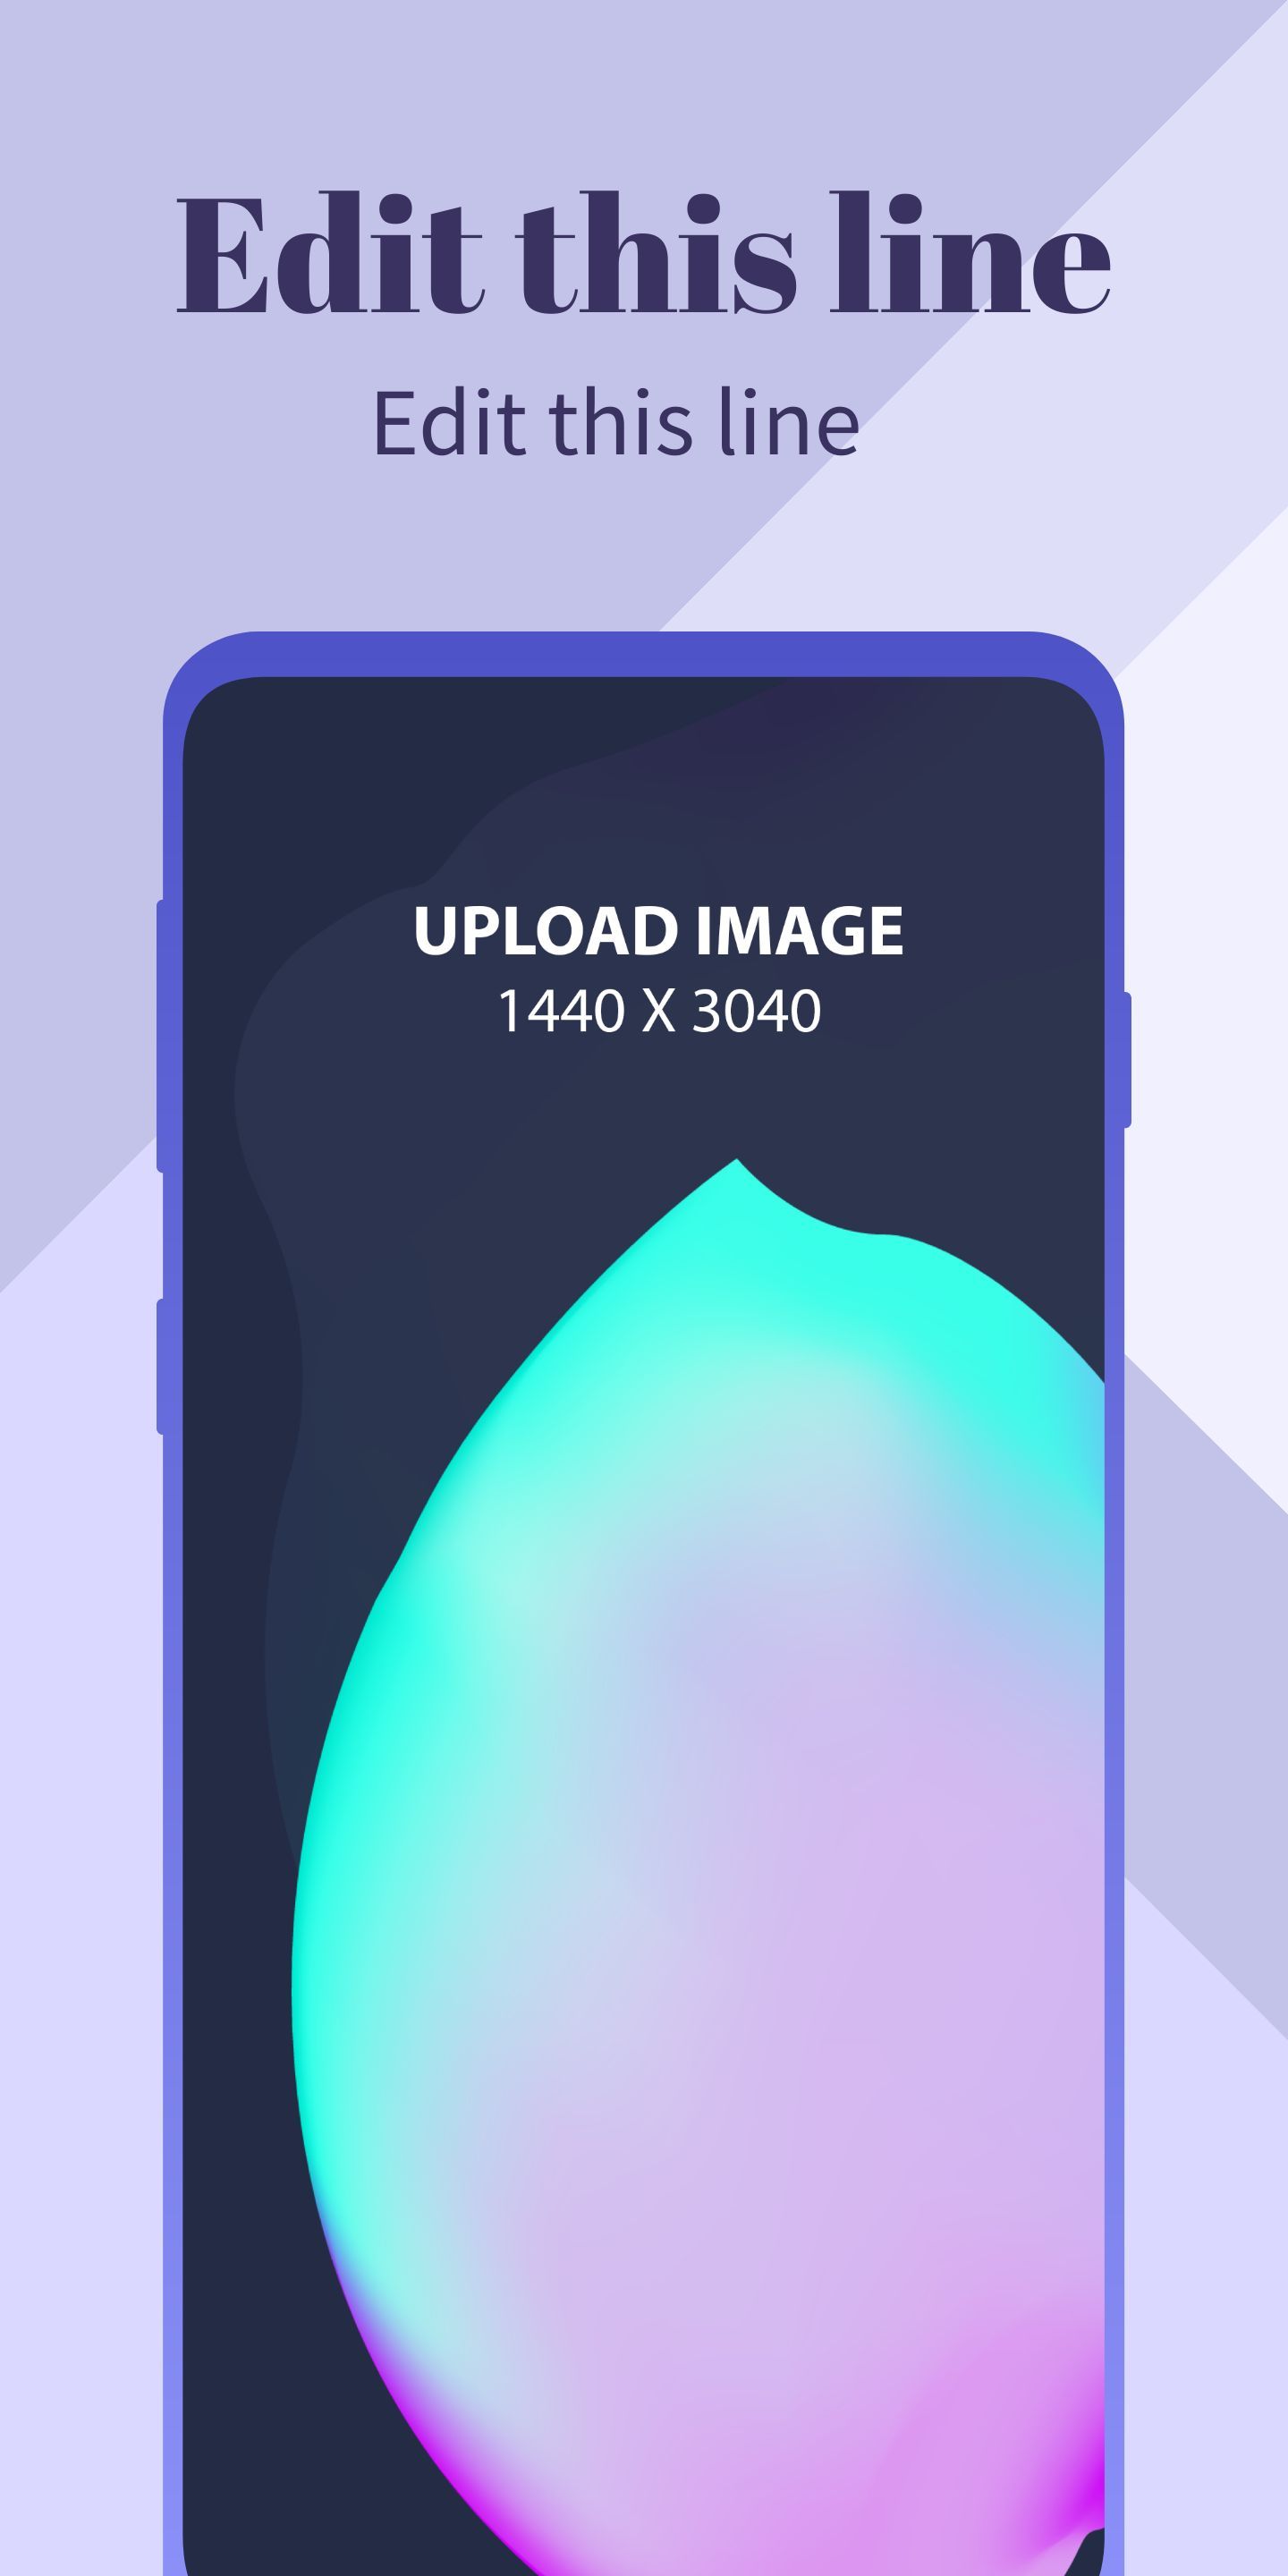 Samsung S10 Screenshot 5 template. Quickly edit fonts, text, colors, and more for free.